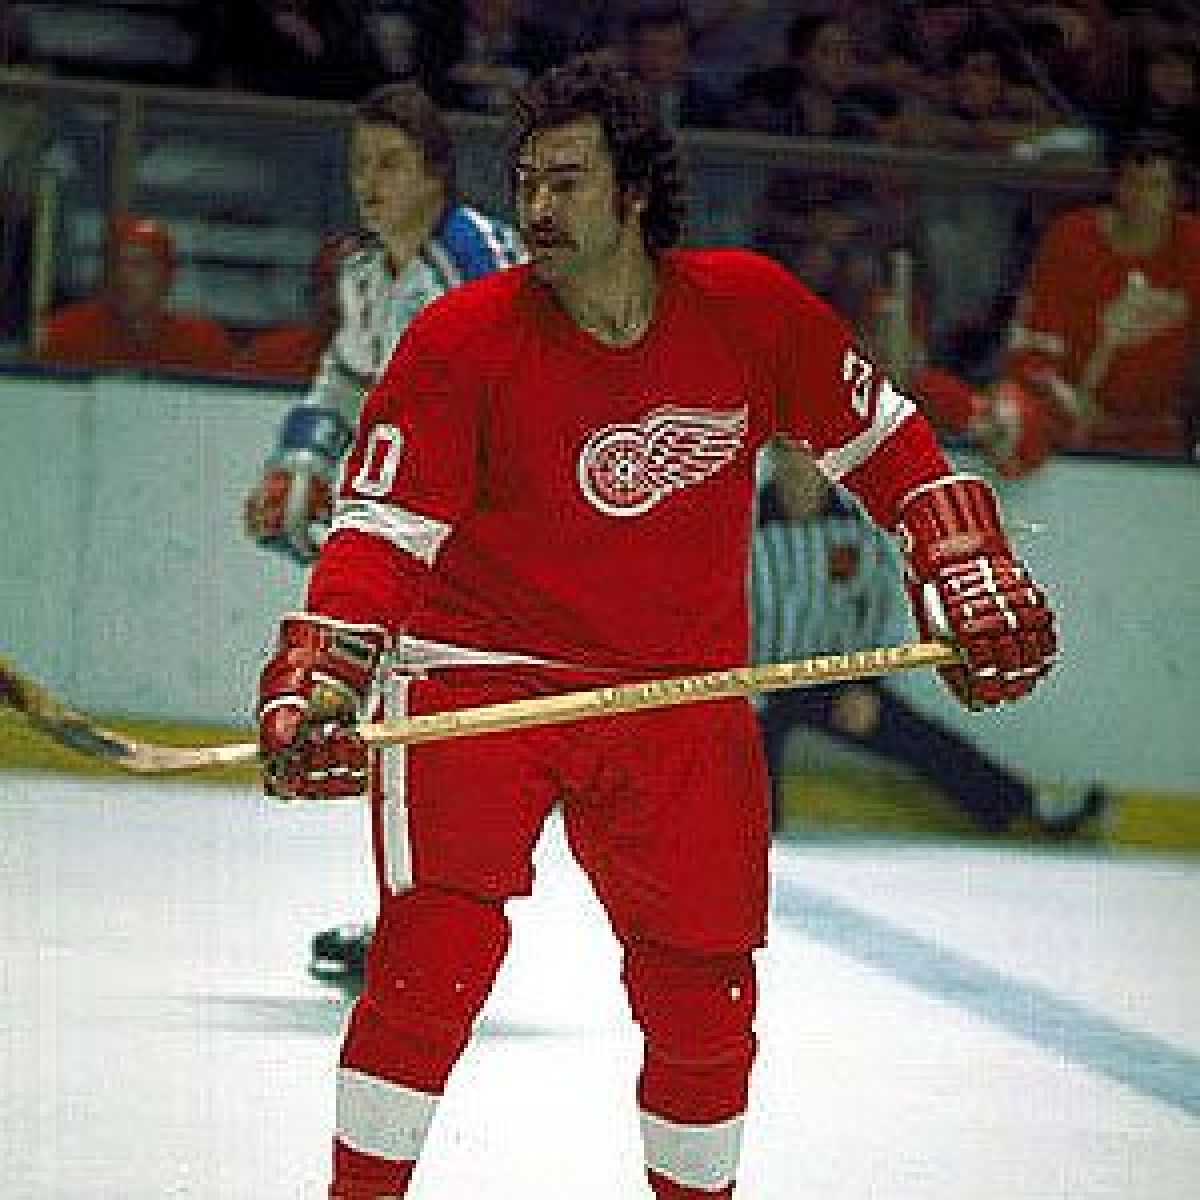 The Life & Times of the Red Wings' Mickey Redmond - Vintage Detroit  Collection